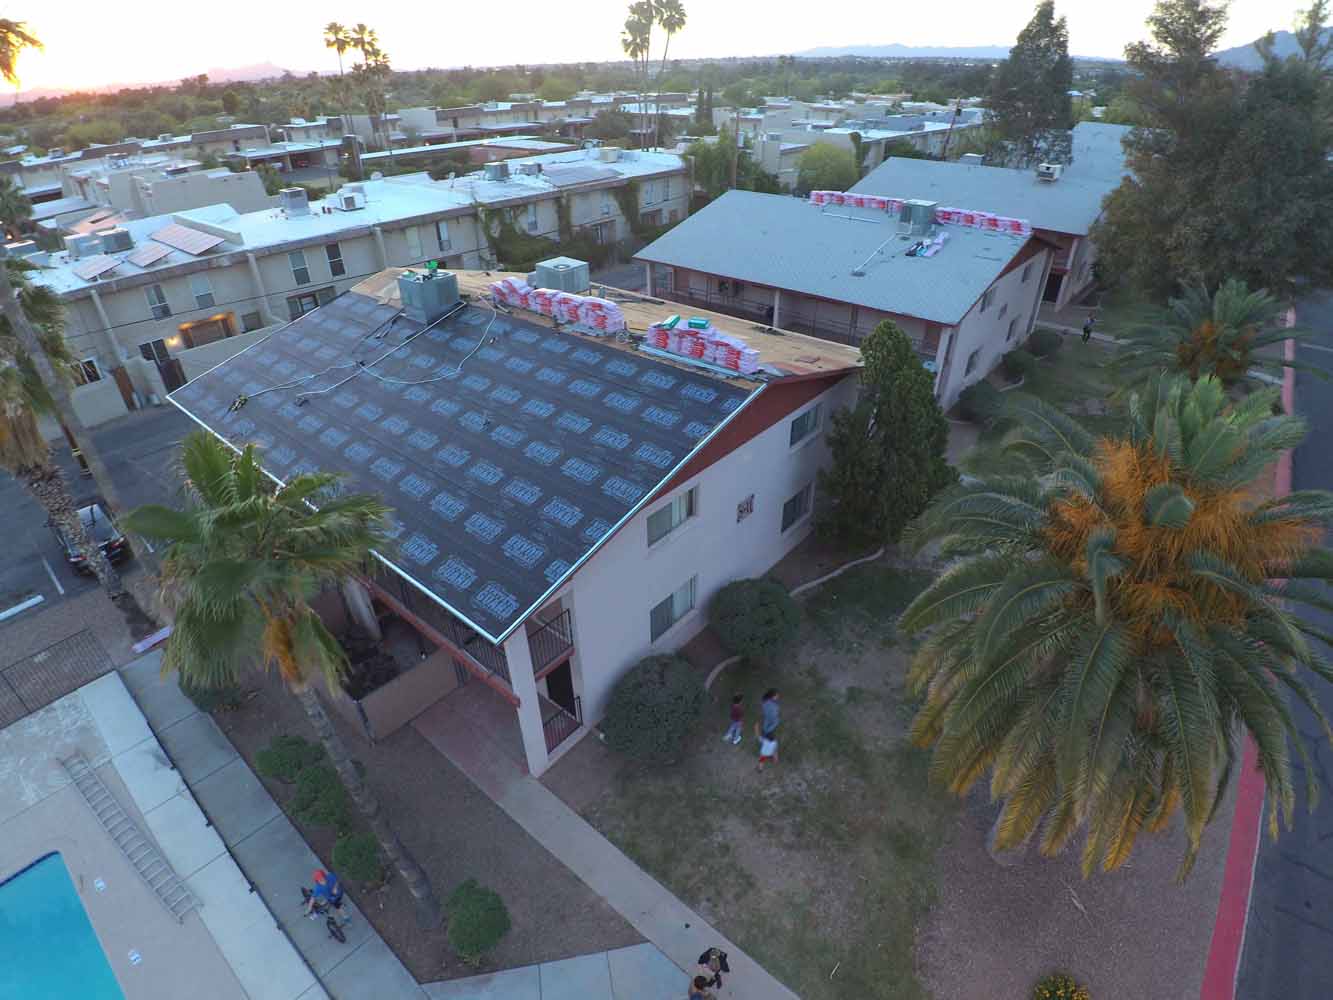 Commercial Roofing in Arizona